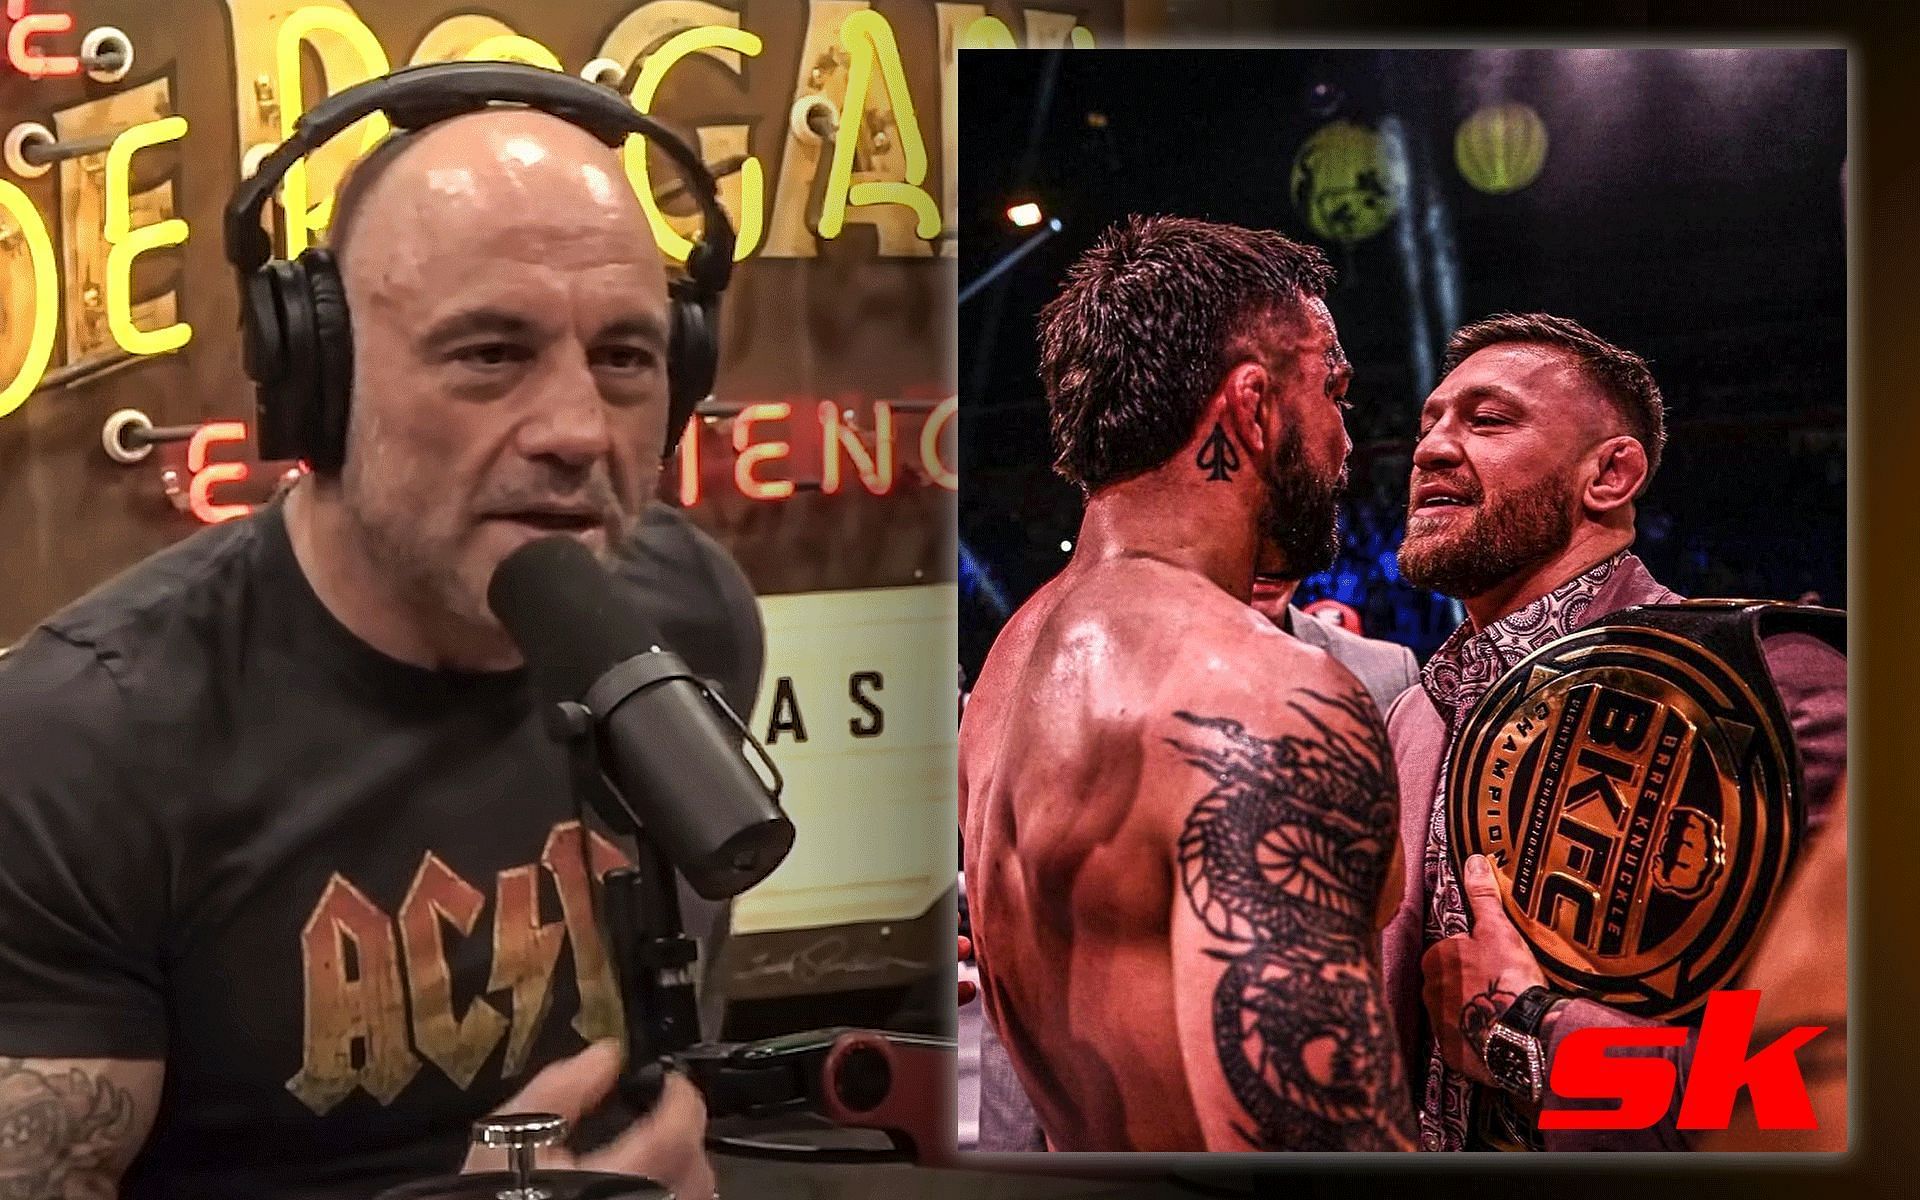 Joe Rogan (left) and Conor McGregor vs. Mike Perry (right) [Image credits: @PowerfulJRE on Youtube and @thenotoriousmma on Instagram]